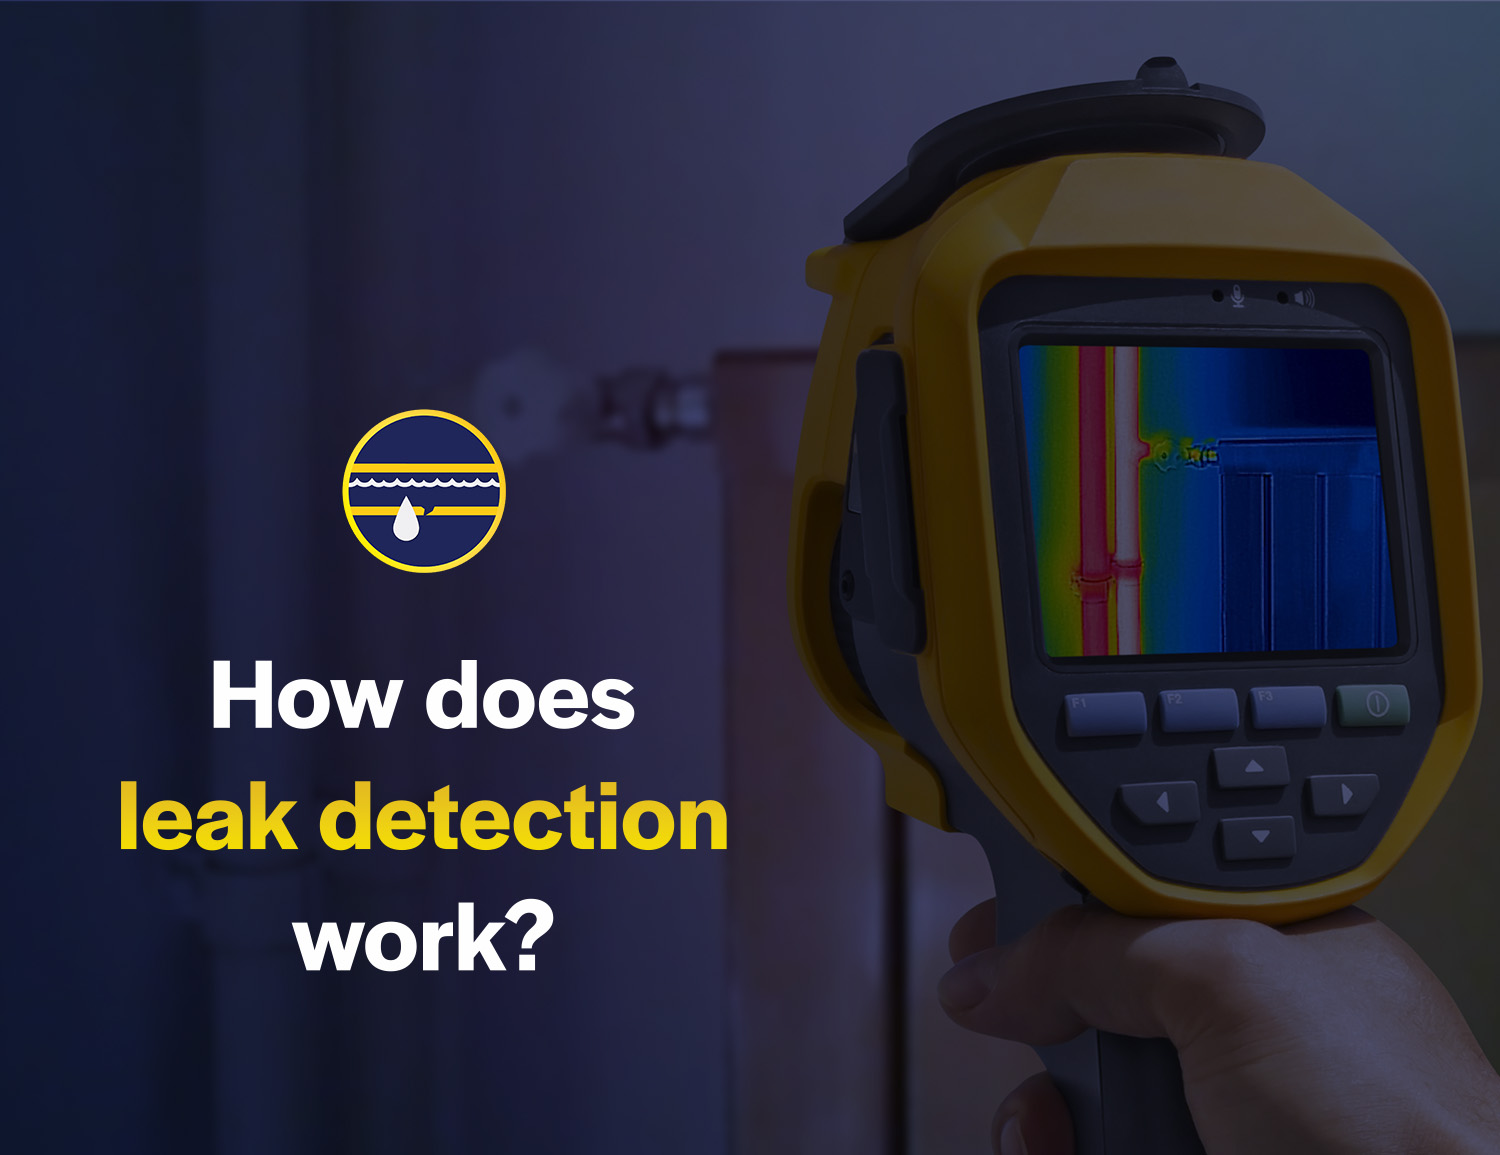 How does leak detection work